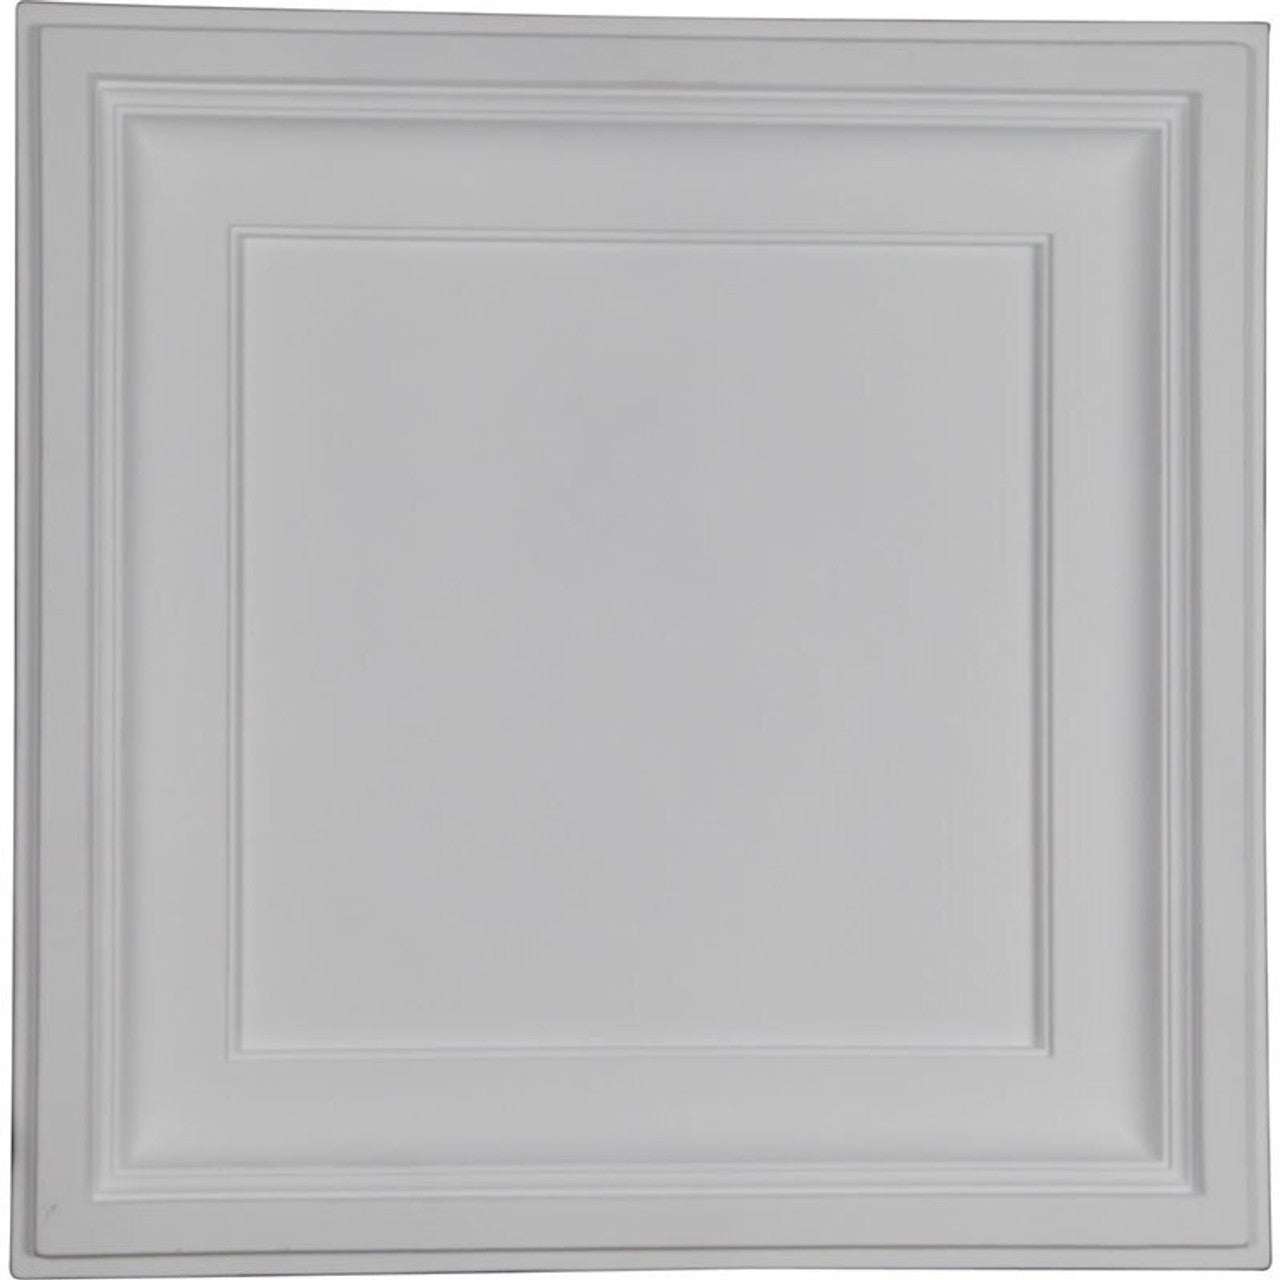 Traditional - Urethane Ceiling Tile - 24"x24"